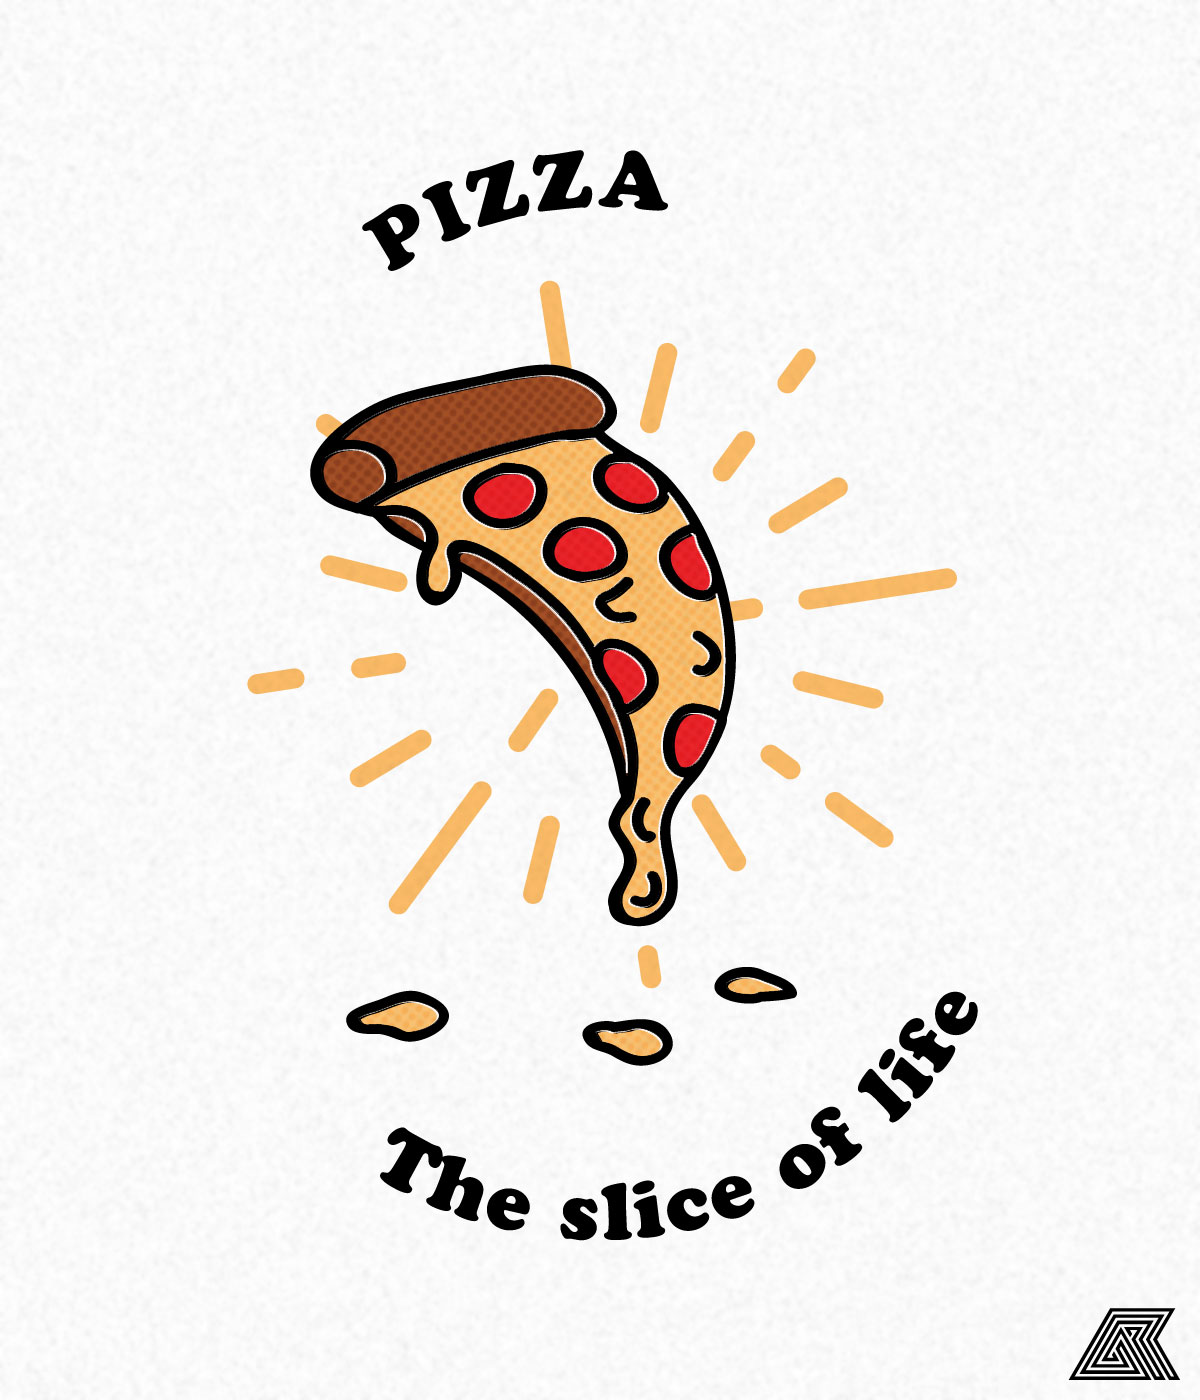 The Slice Of Life